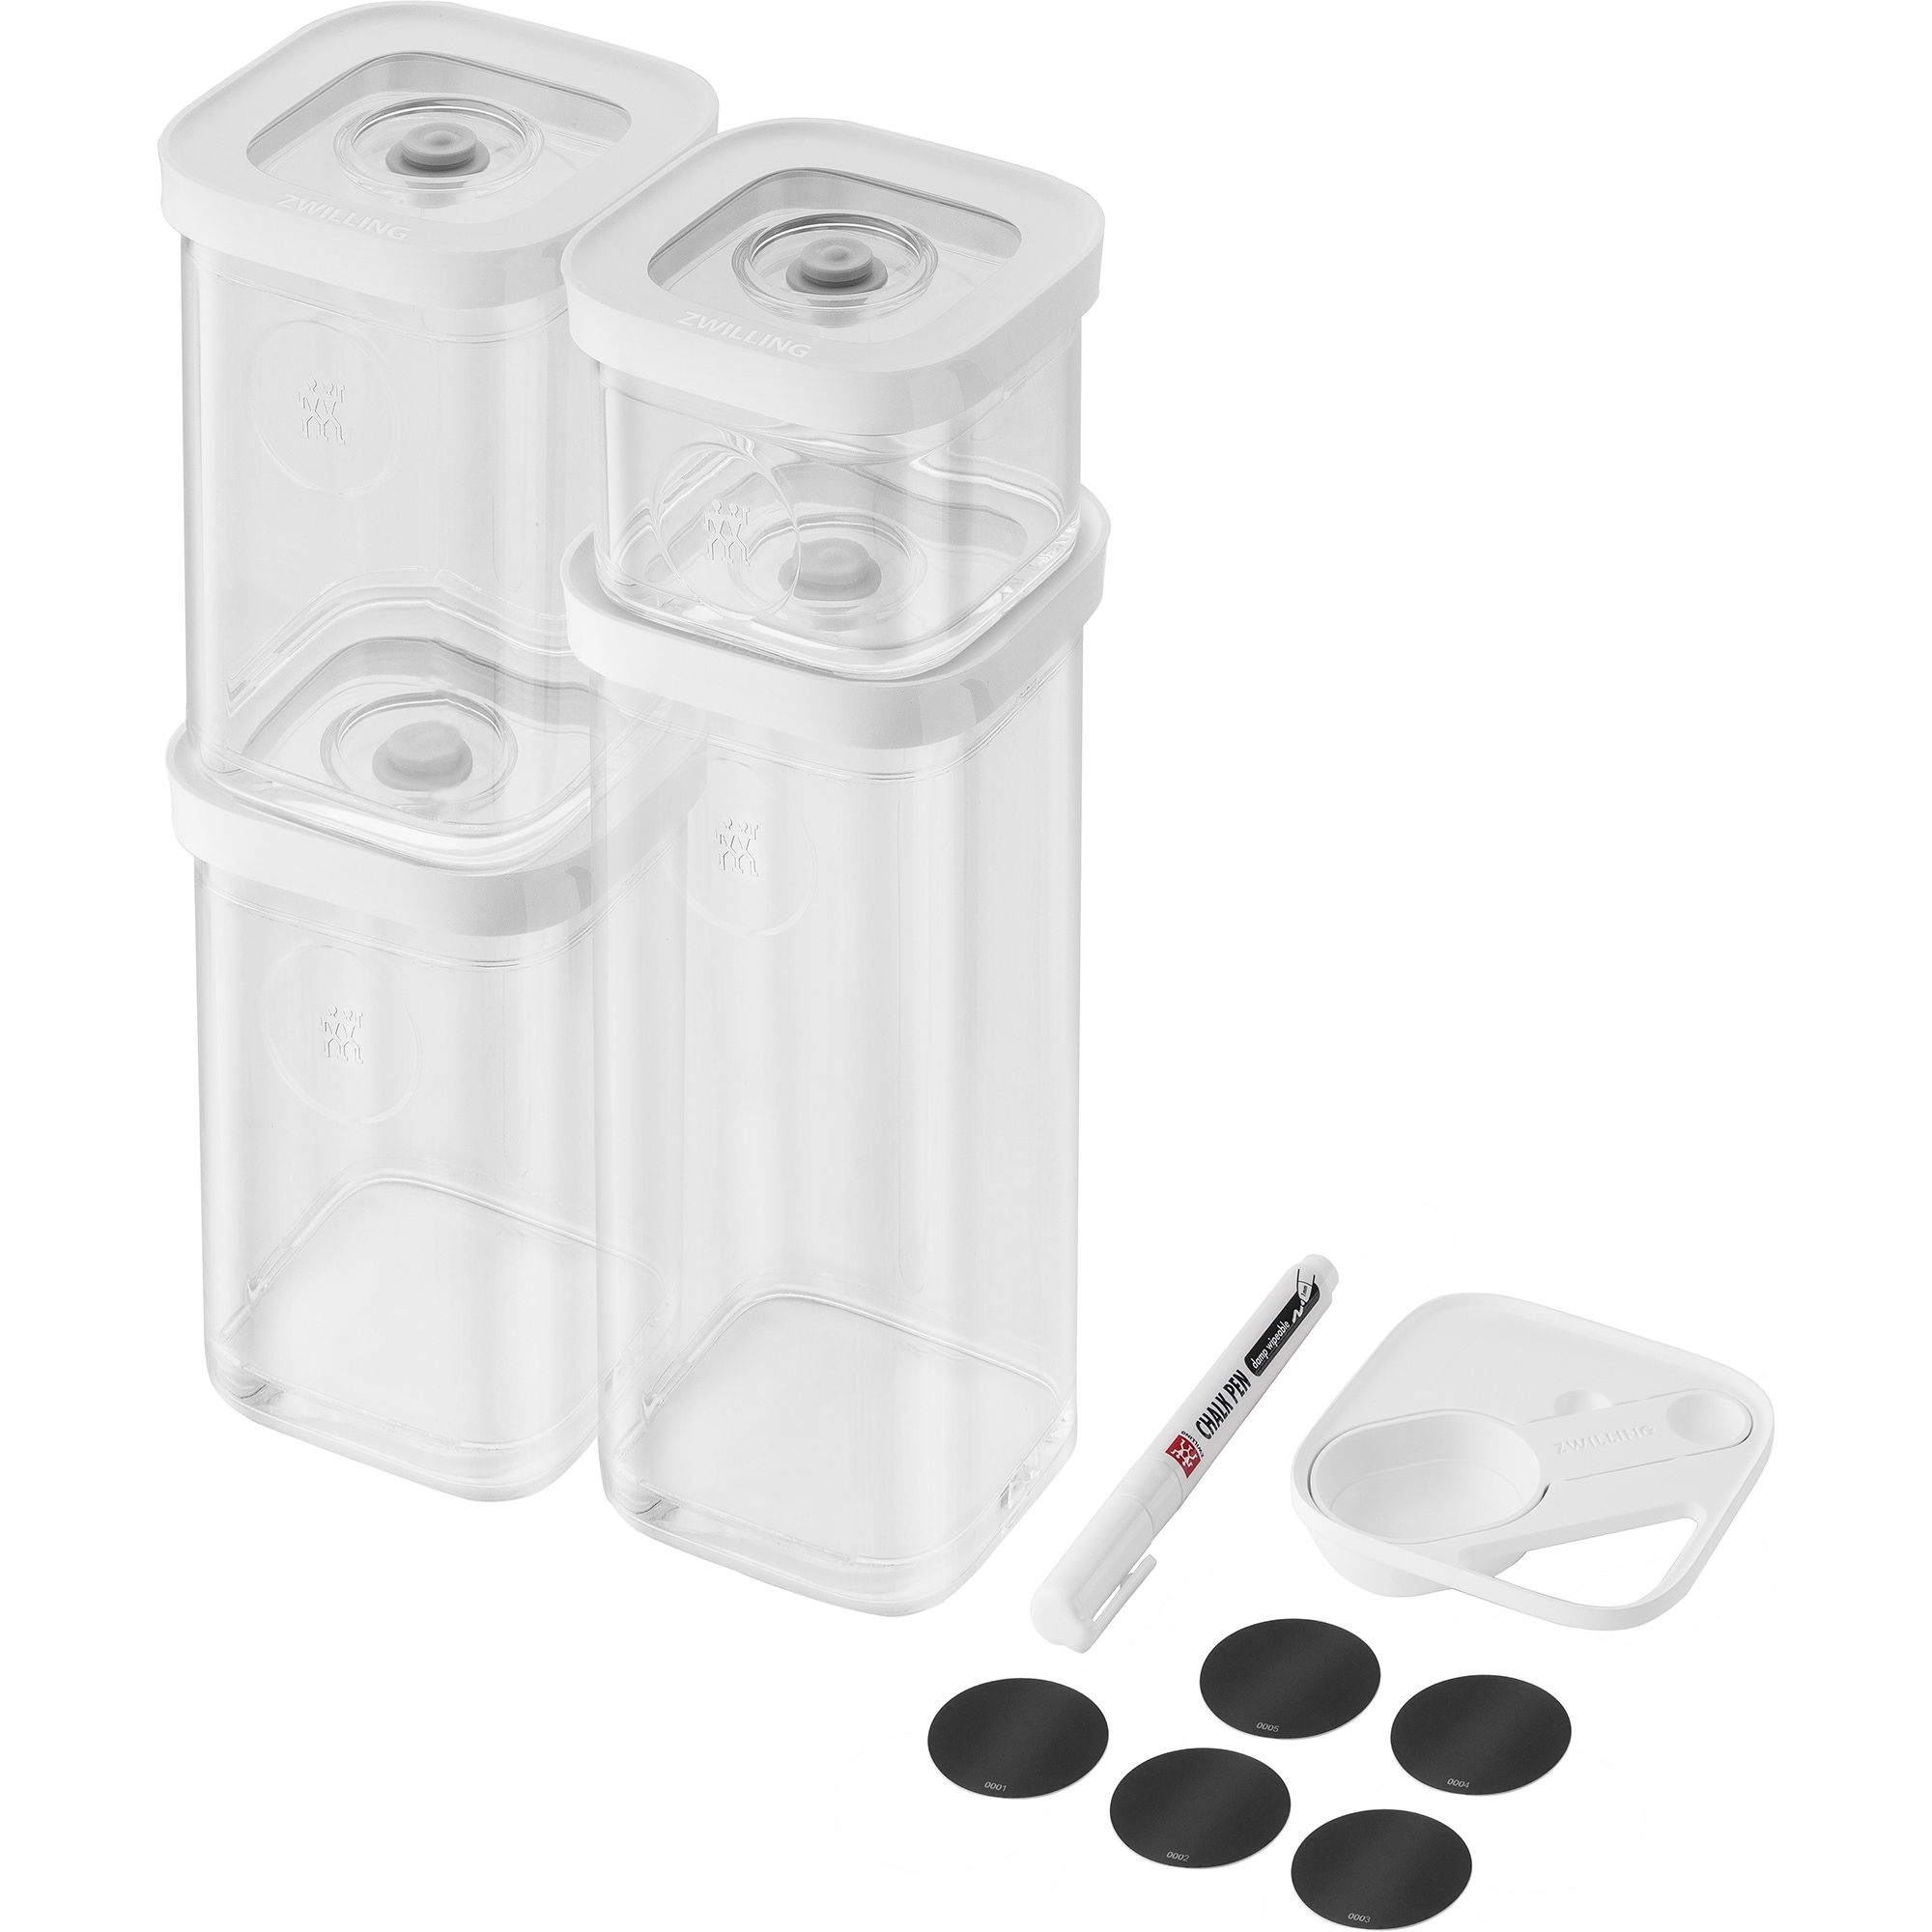 https://ak1.ostkcdn.com/images/products/is/images/direct/ce4ebaa29b4da87e1a15cfa1773d582297789bcd/ZWILLING-Fresh-%26-Save-Cube-Box-Set%2C-6-pc%2C-Plastic%2C-Airtight-Dry-Food-Storage-Container%2C-Small-Cube-Set.jpg